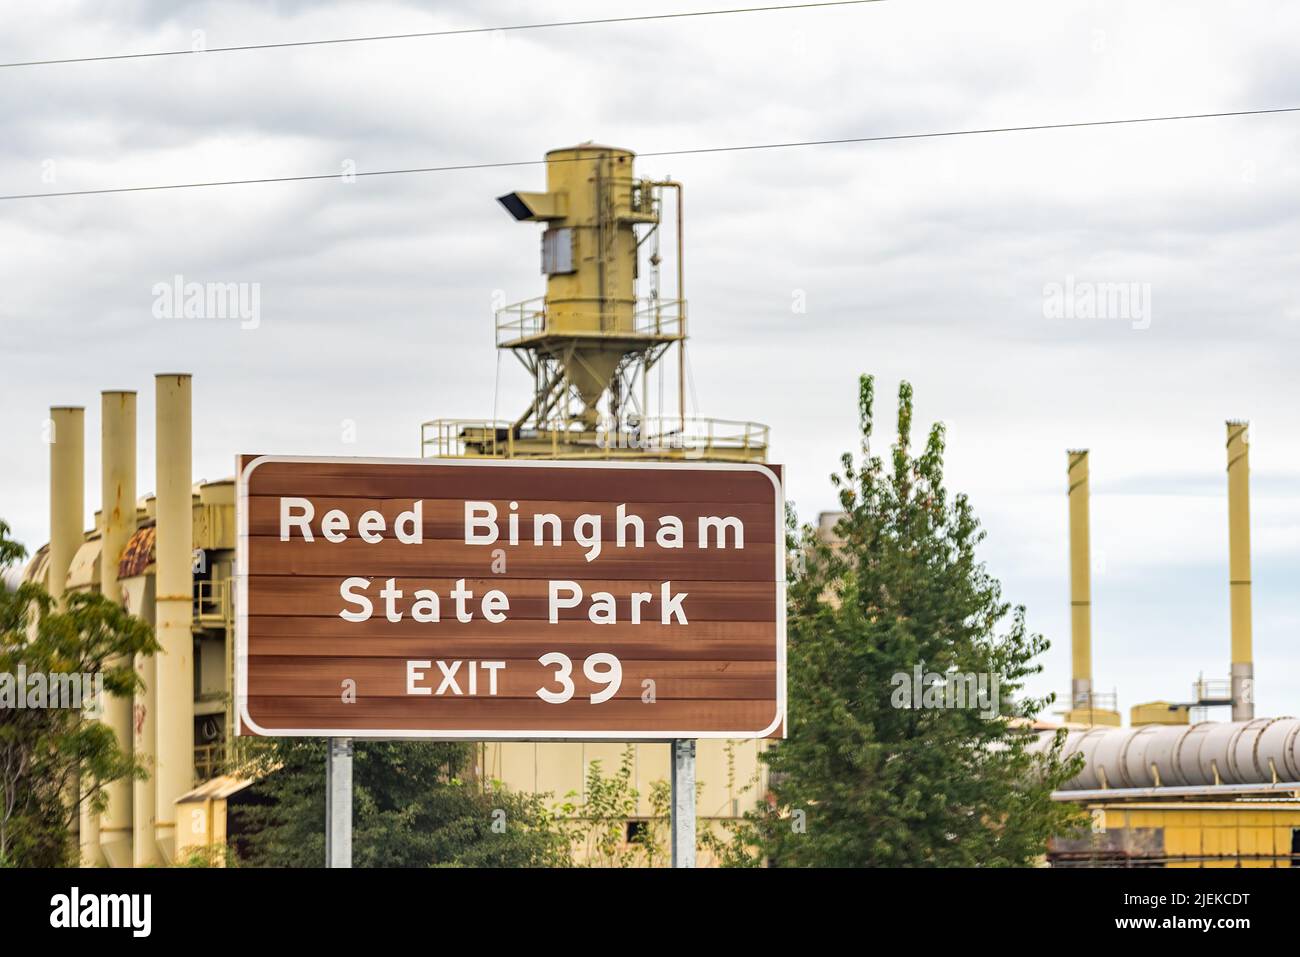 Adel, Georgia on interstate i-75 with sign for Reed Bingham State Park at Exit 39 and background of Sunbelt Industrial Recycling center Stock Photo